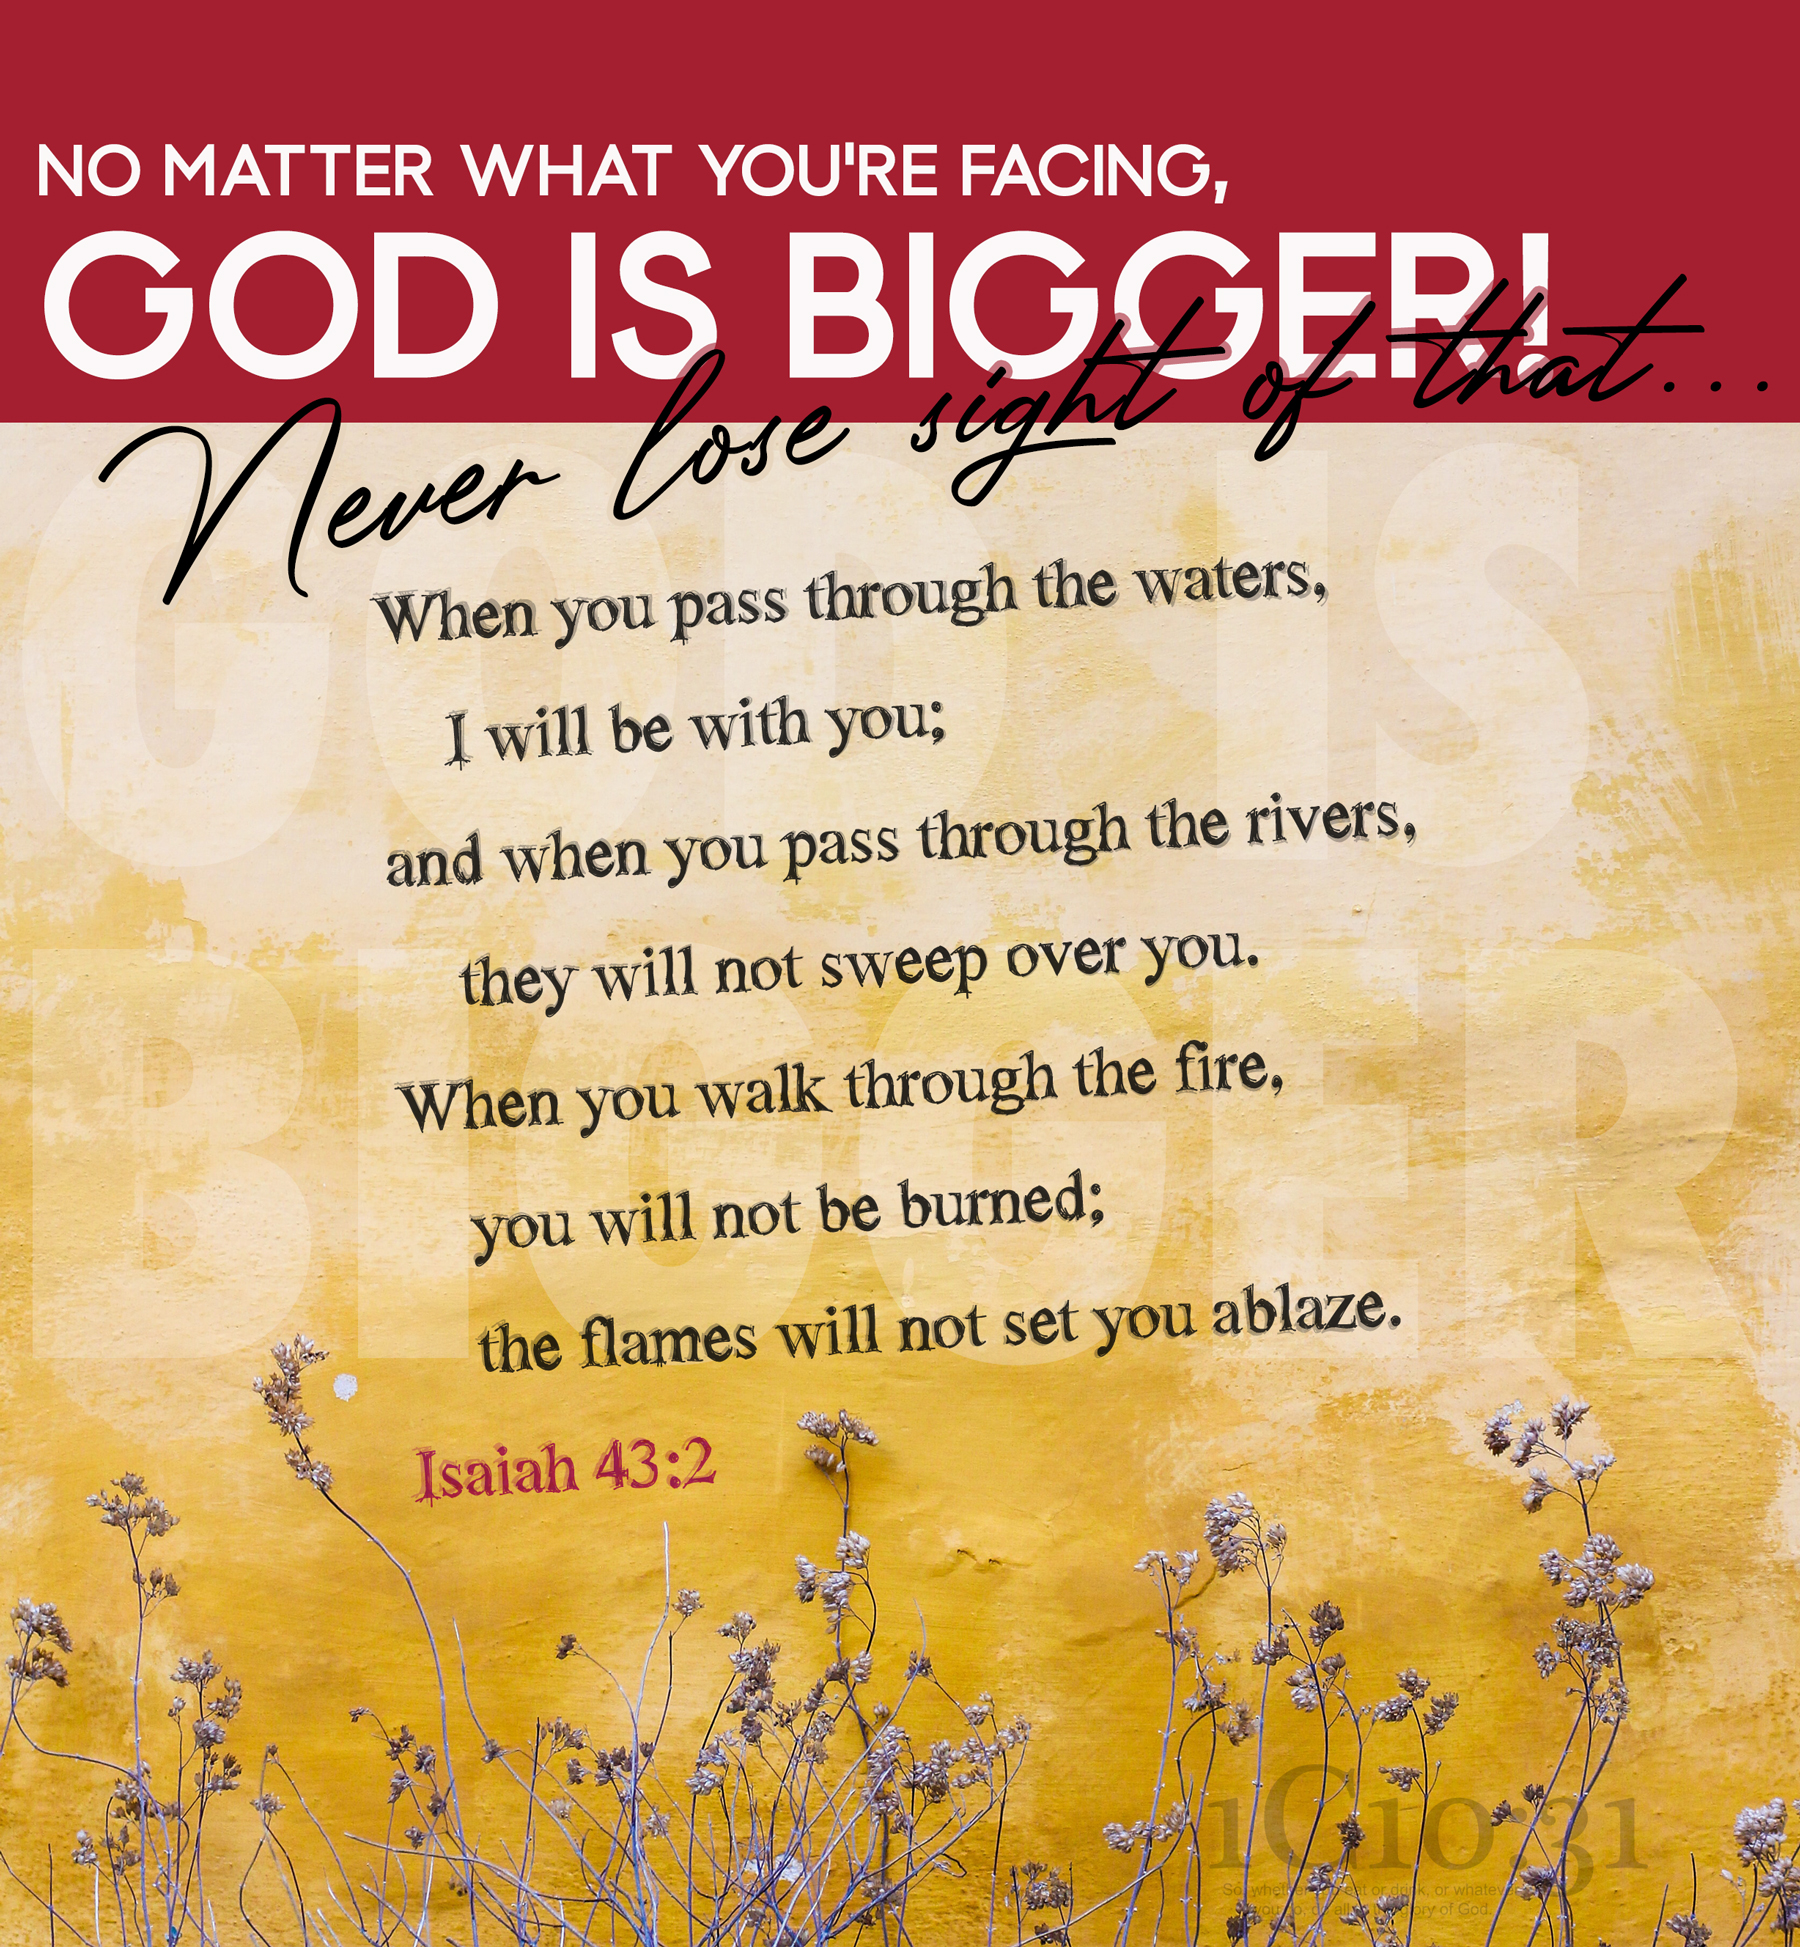 No matter what you are facing, God is Bigger. Never lose sight of that.